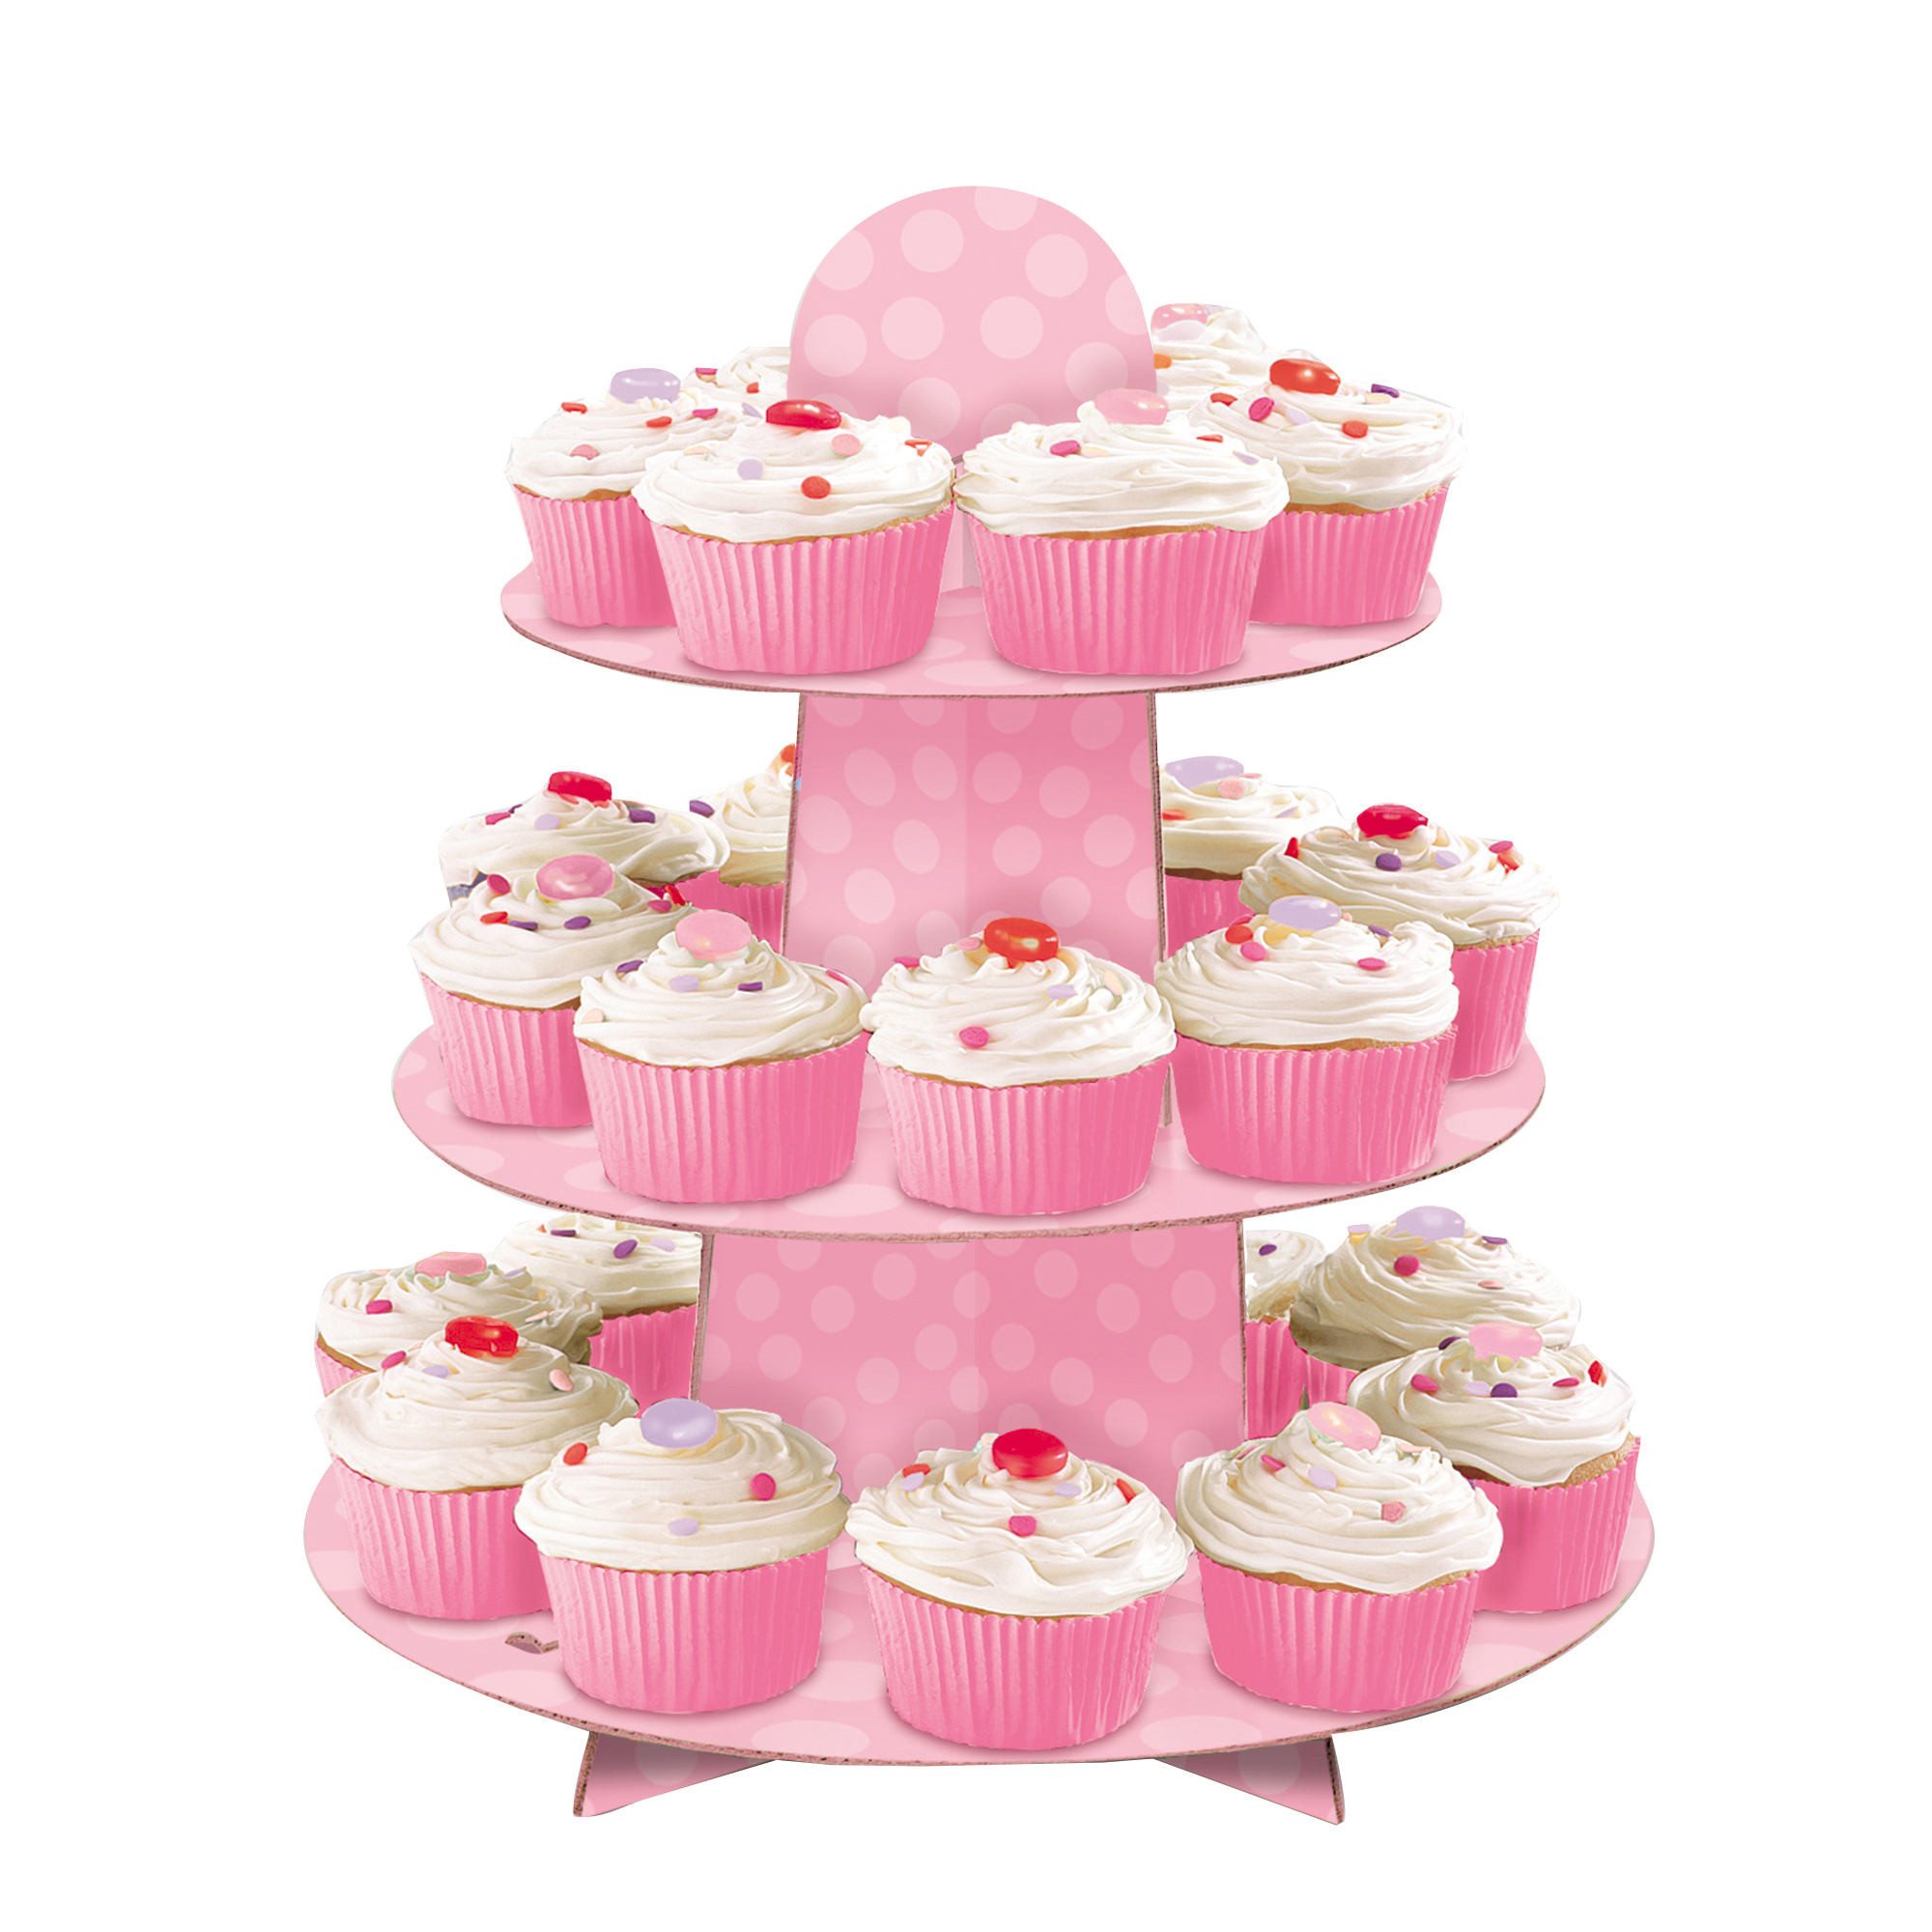 Pink Cardboard Cupcake Stand, 1.1ft x 11.75in - image 1 of 3